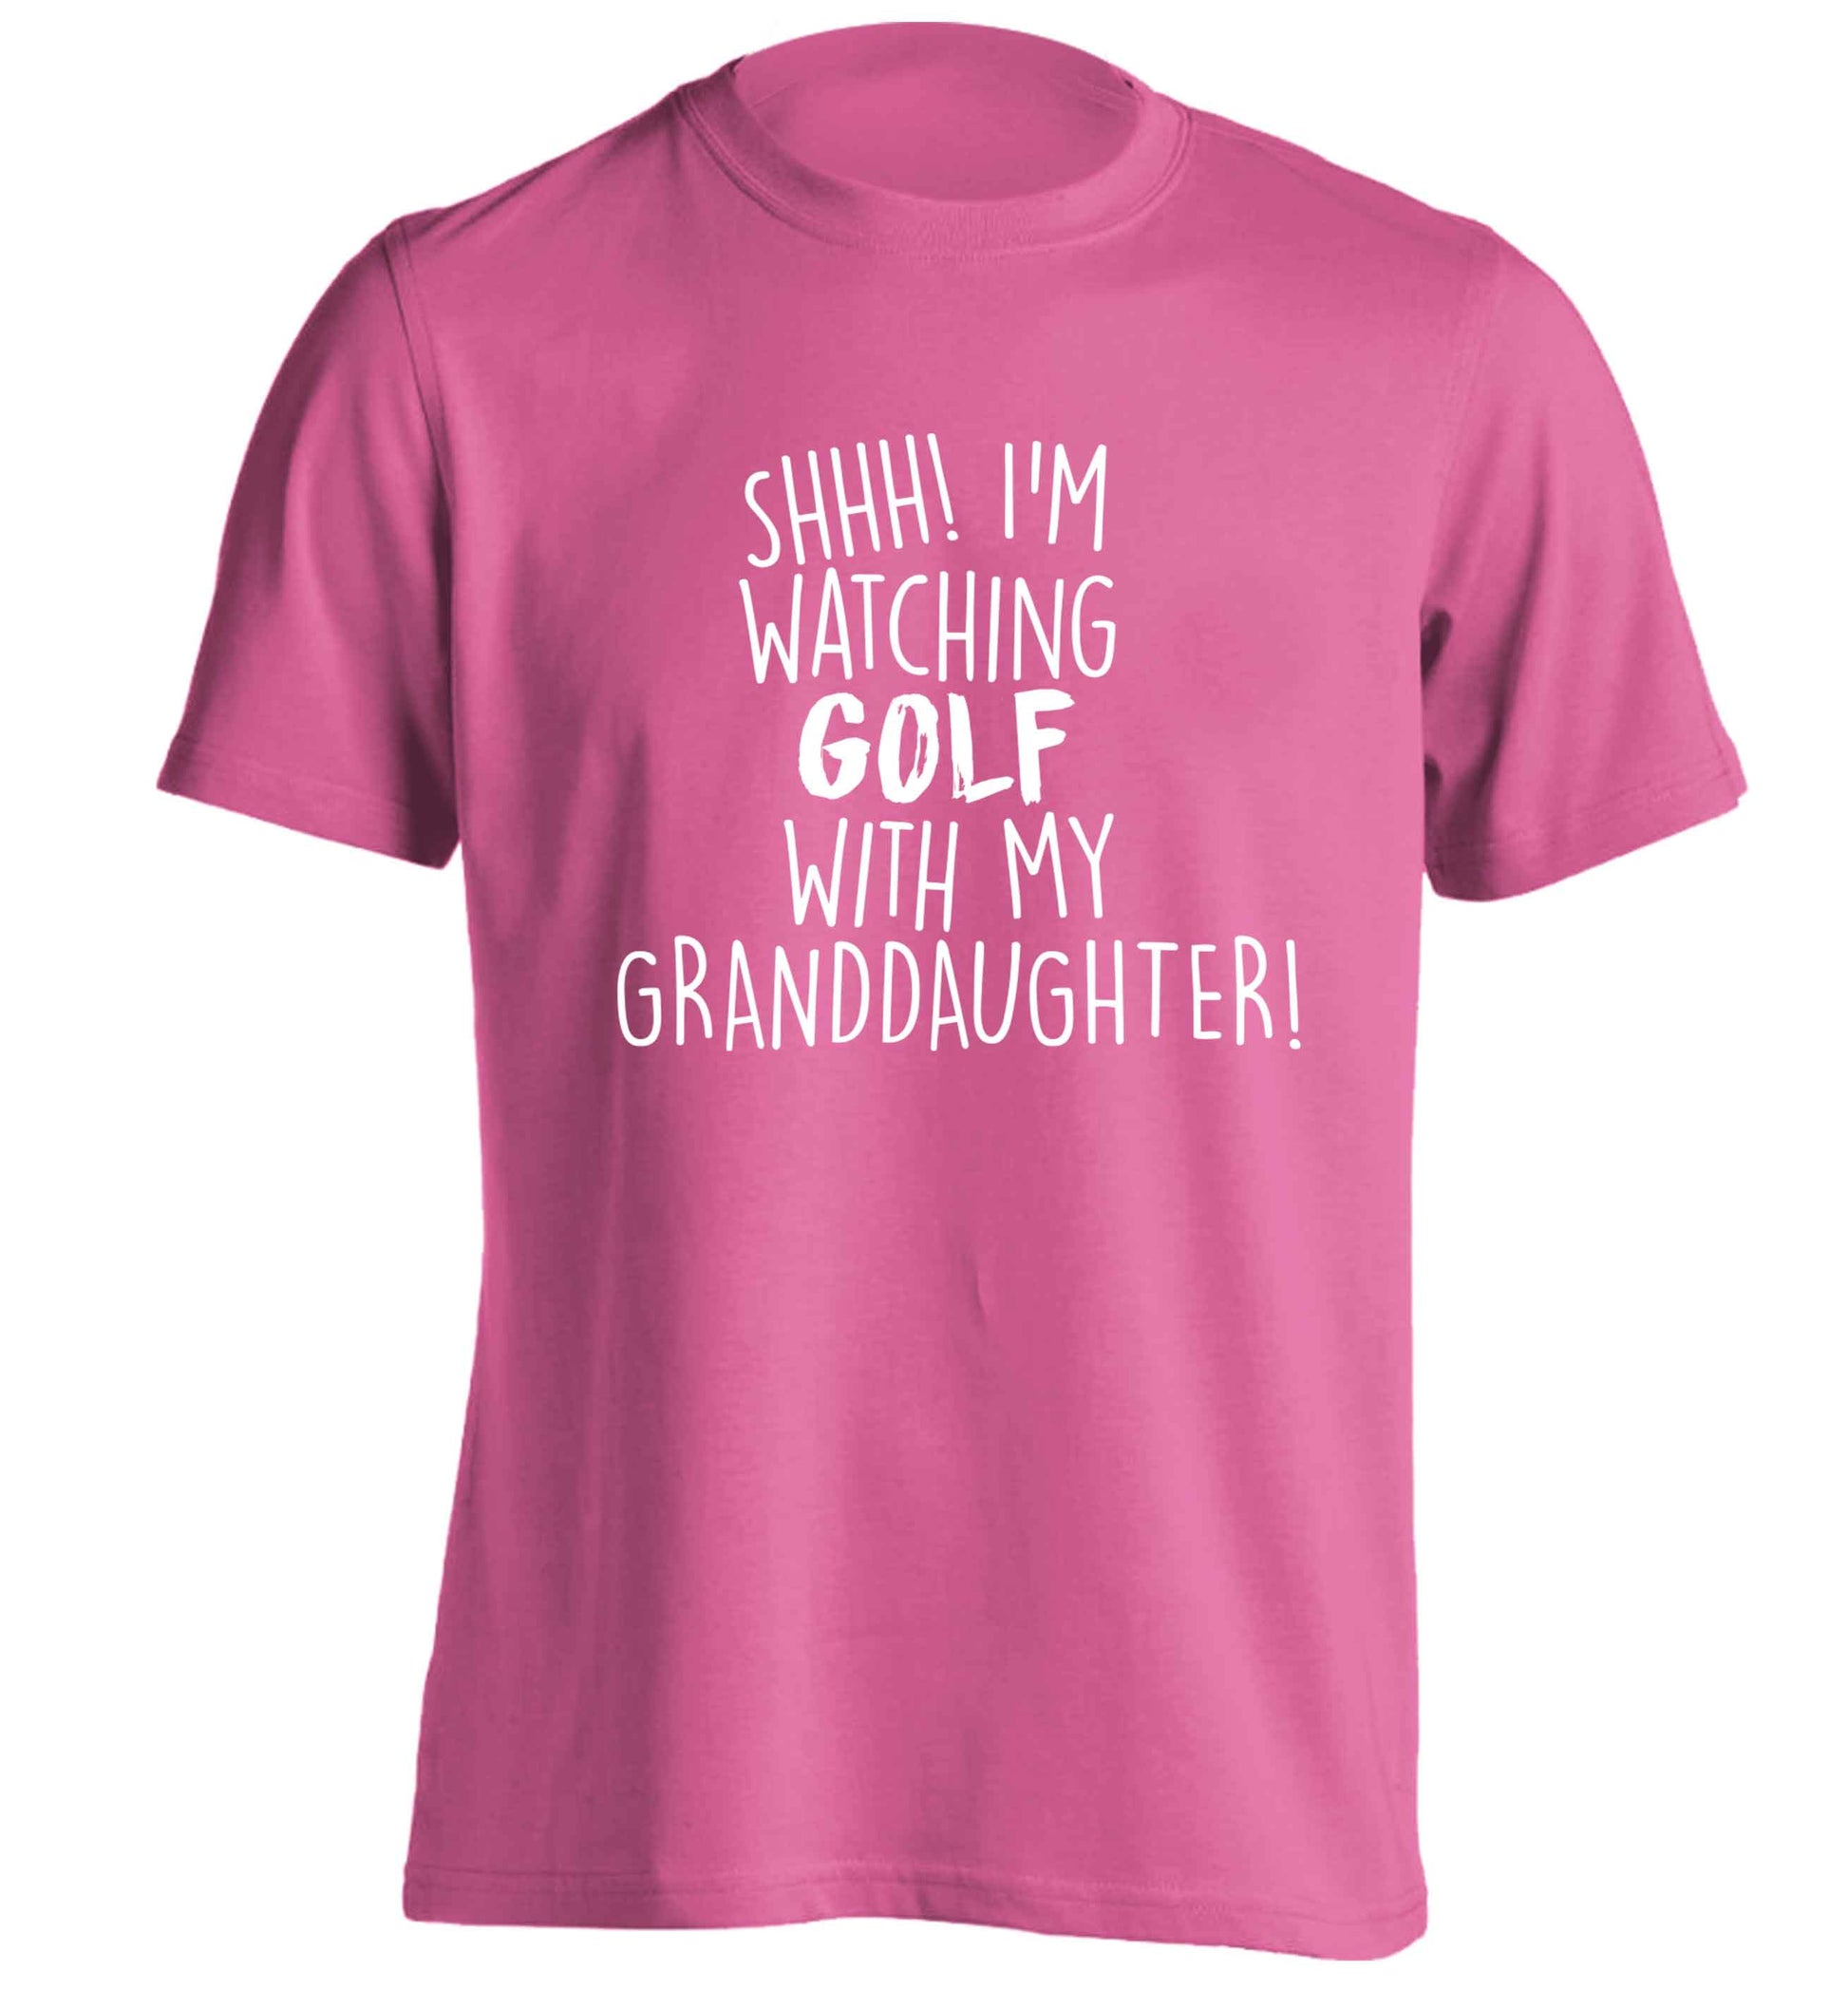 Shh I'm watching golf with my granddaughter adults unisex pink Tshirt 2XL